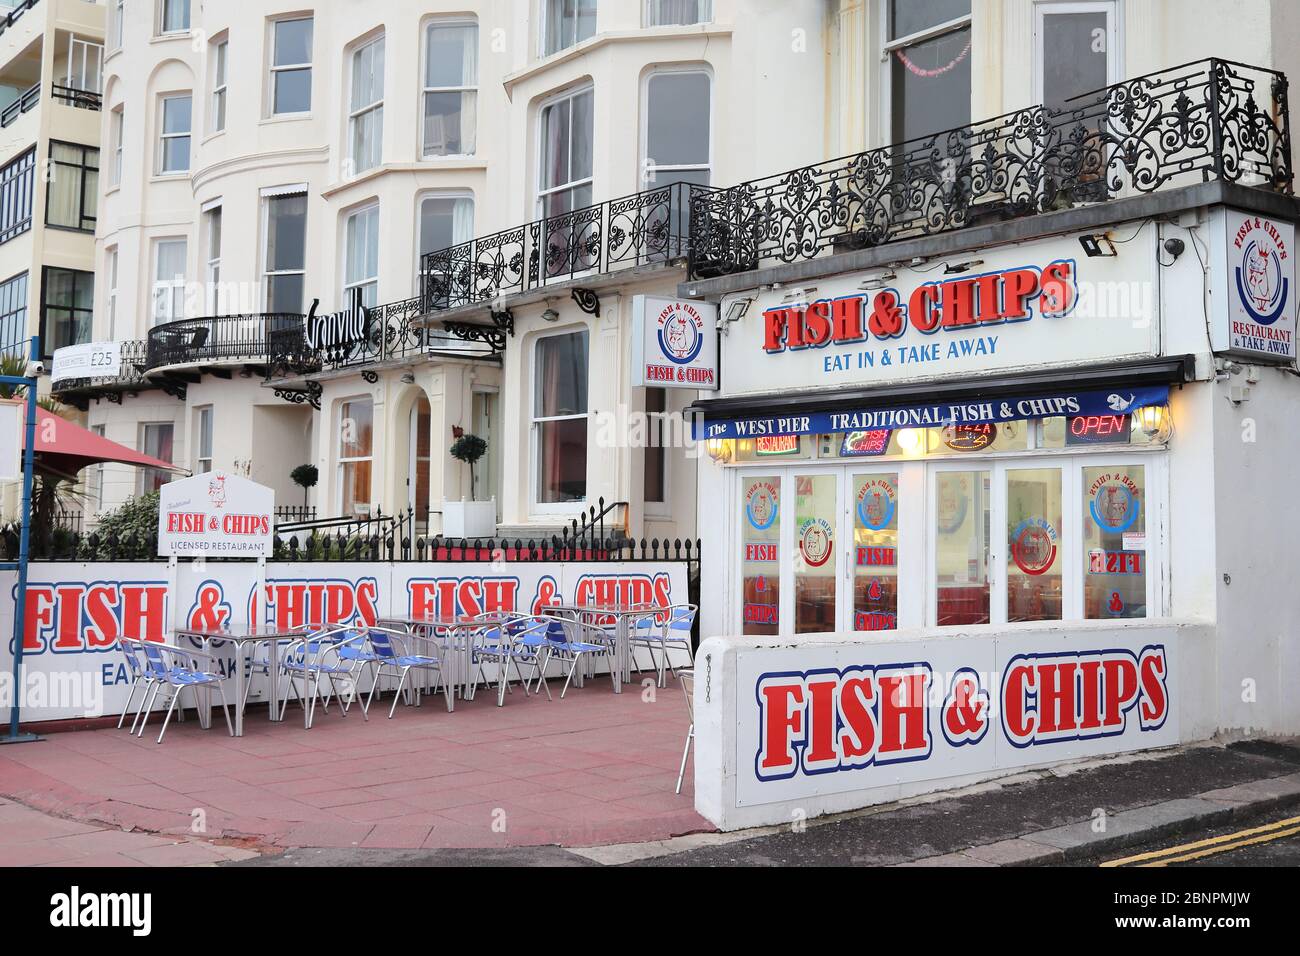 Fish and chips takeaway restaurant in seaside resort Brighton, East Sussex, United Kingdom. Stock Photo